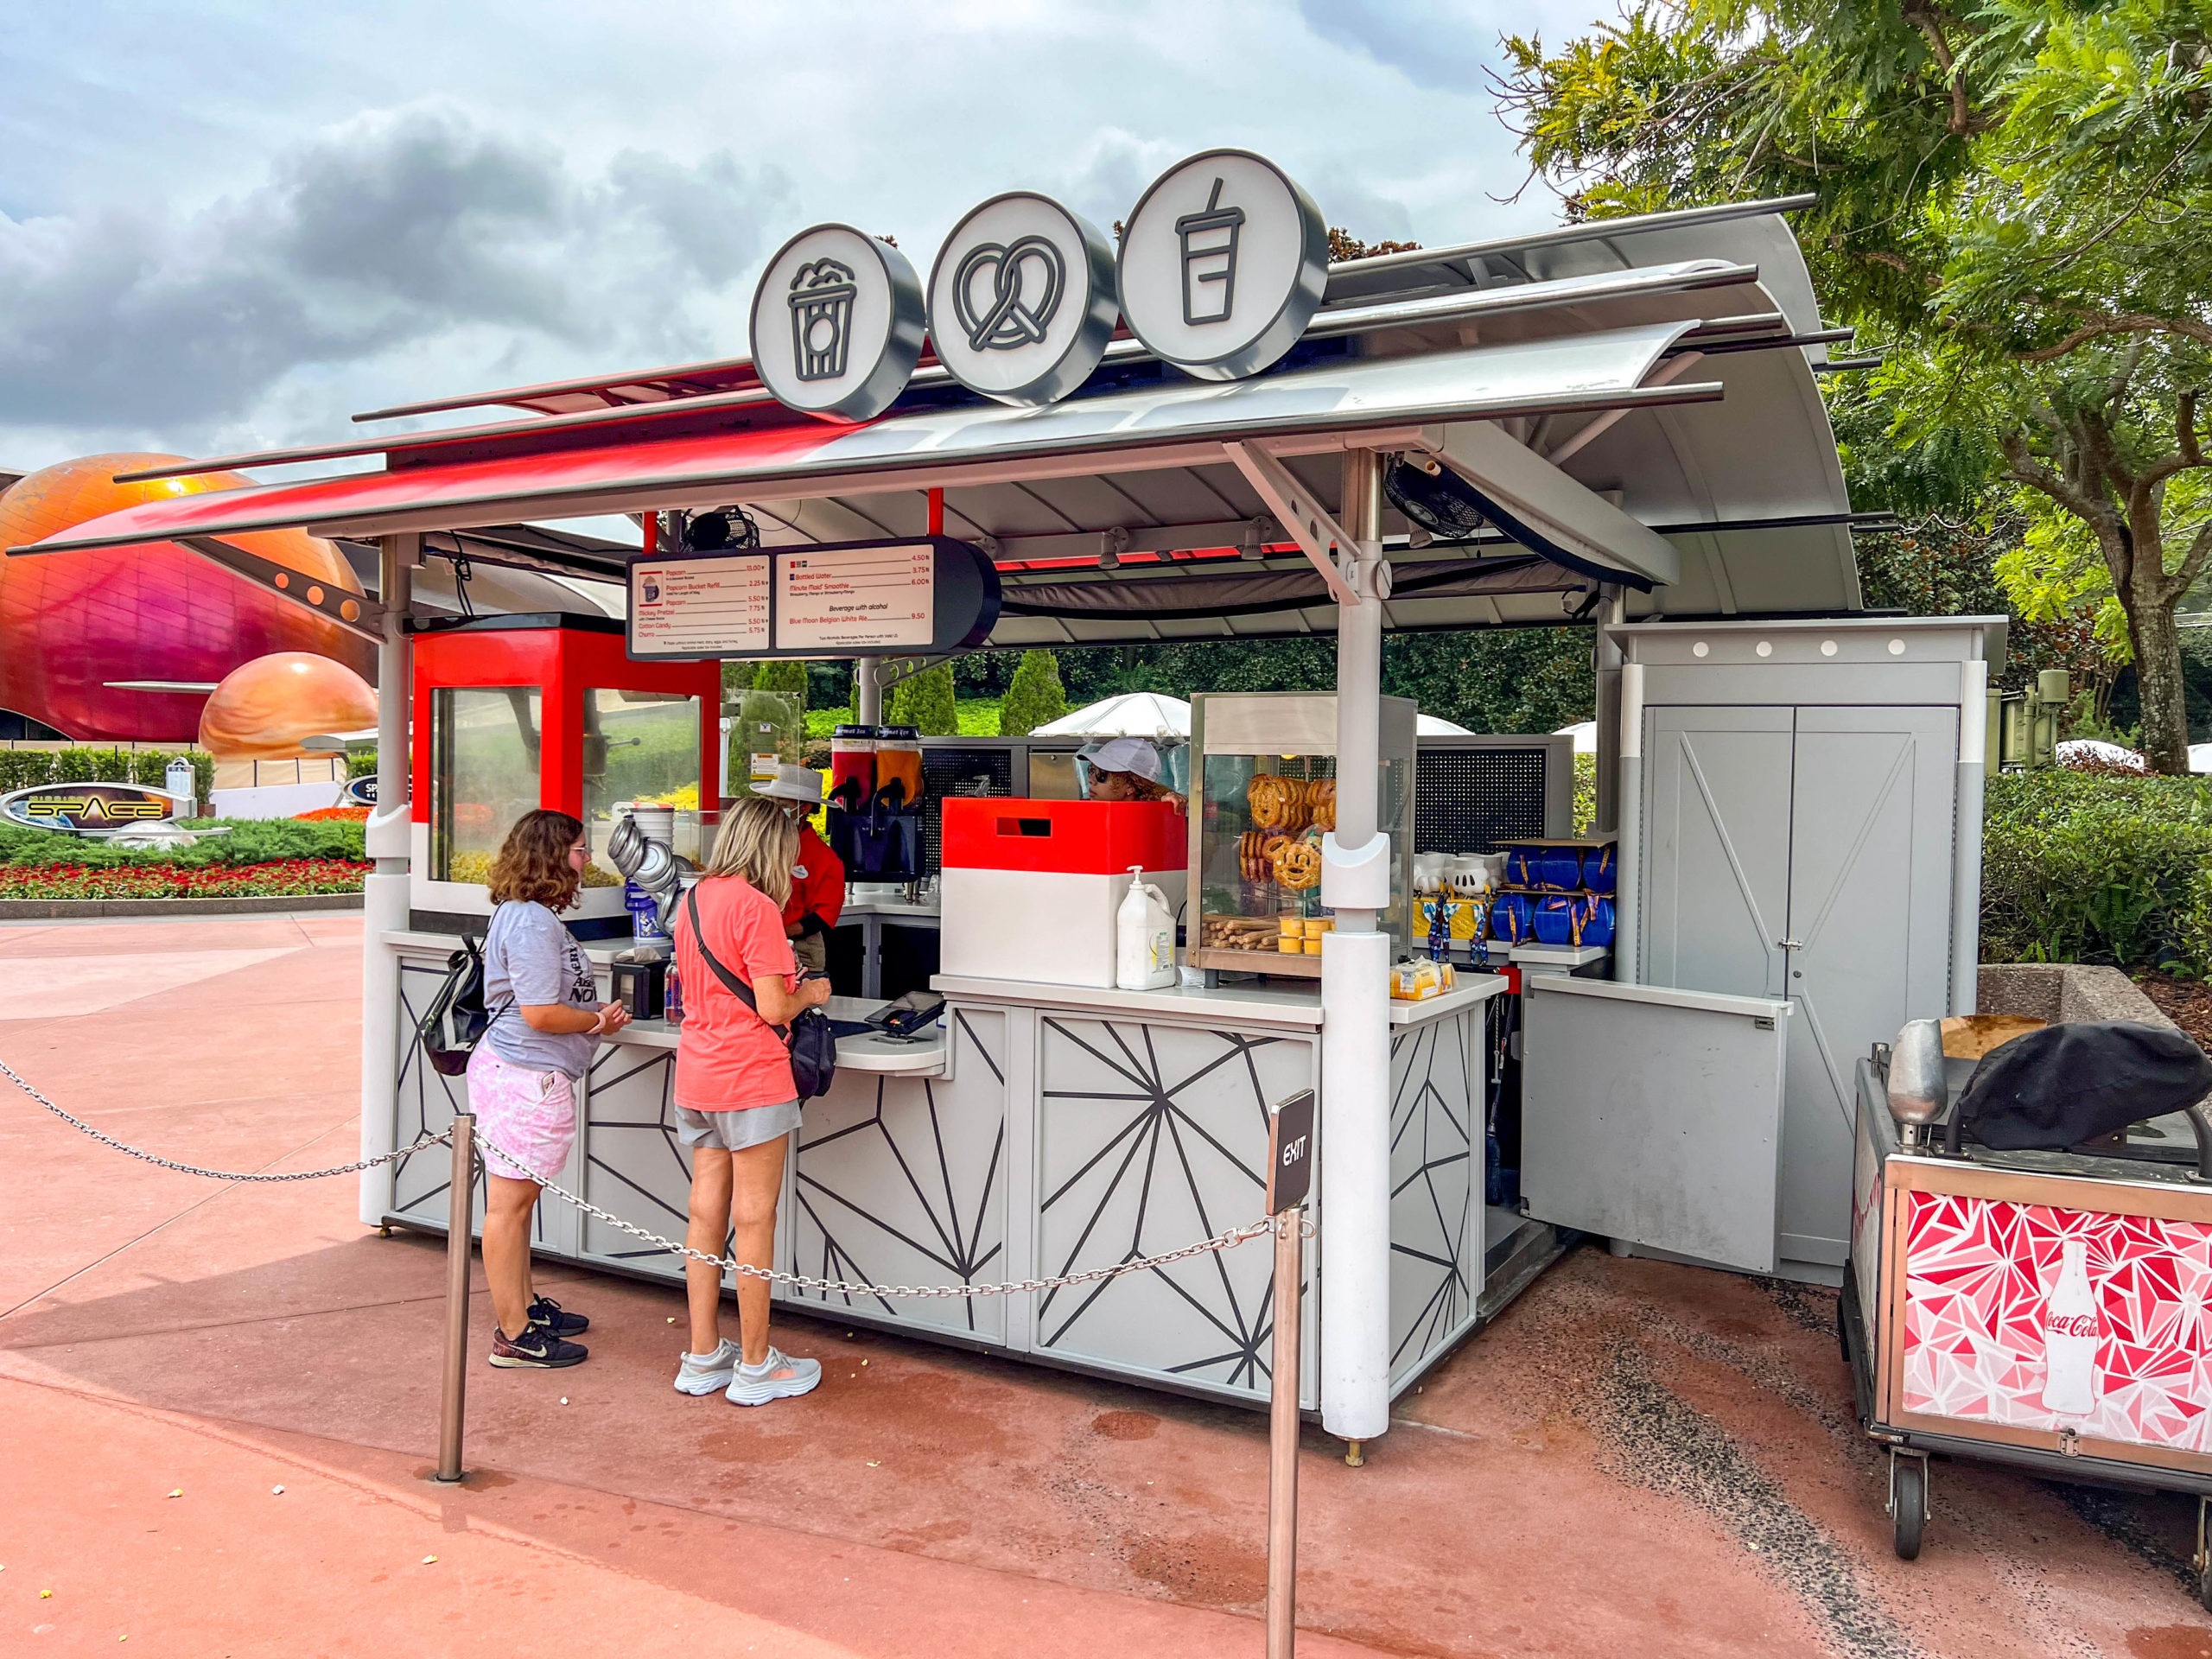 Popcorn Cart in EPCOT near Mission: SPACE